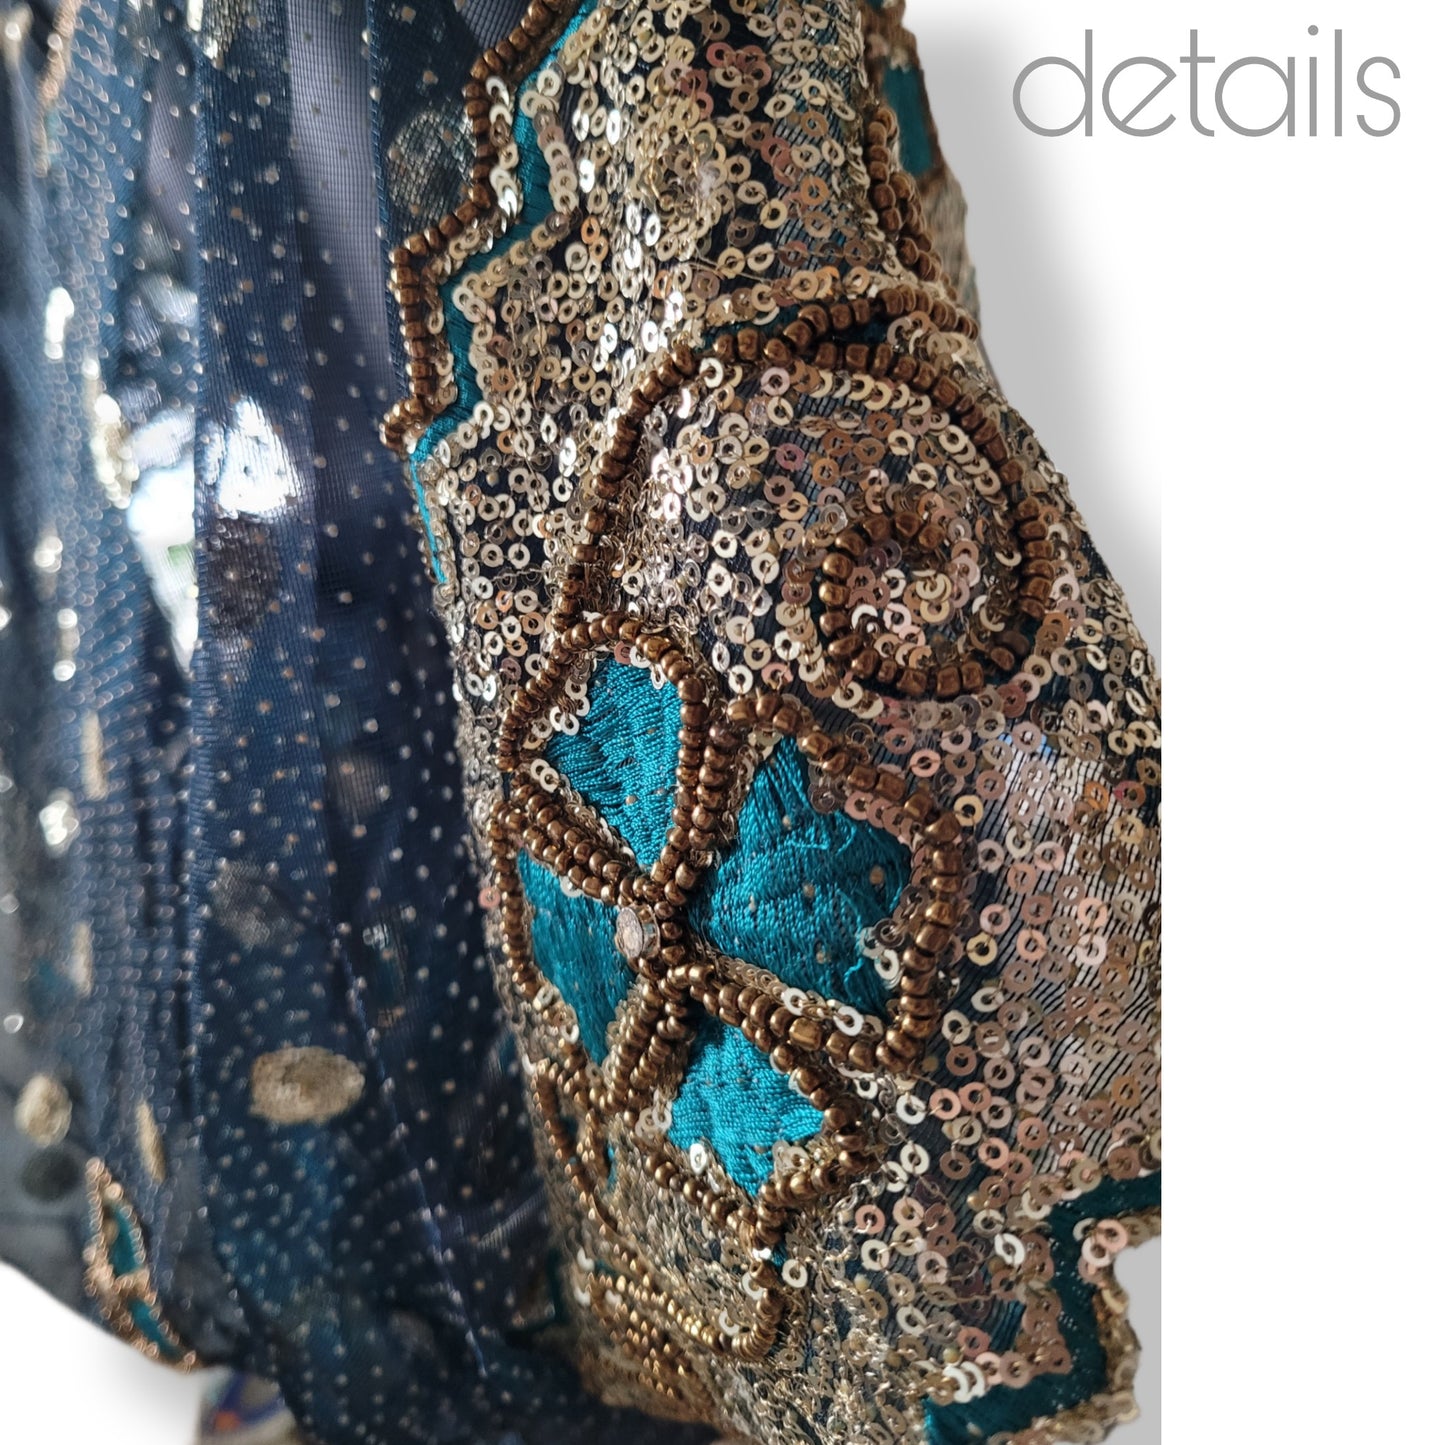 Draped kimono in stiffer net fabric, teal with beautiful heavy hand embrodery in gold and teal (M-L)